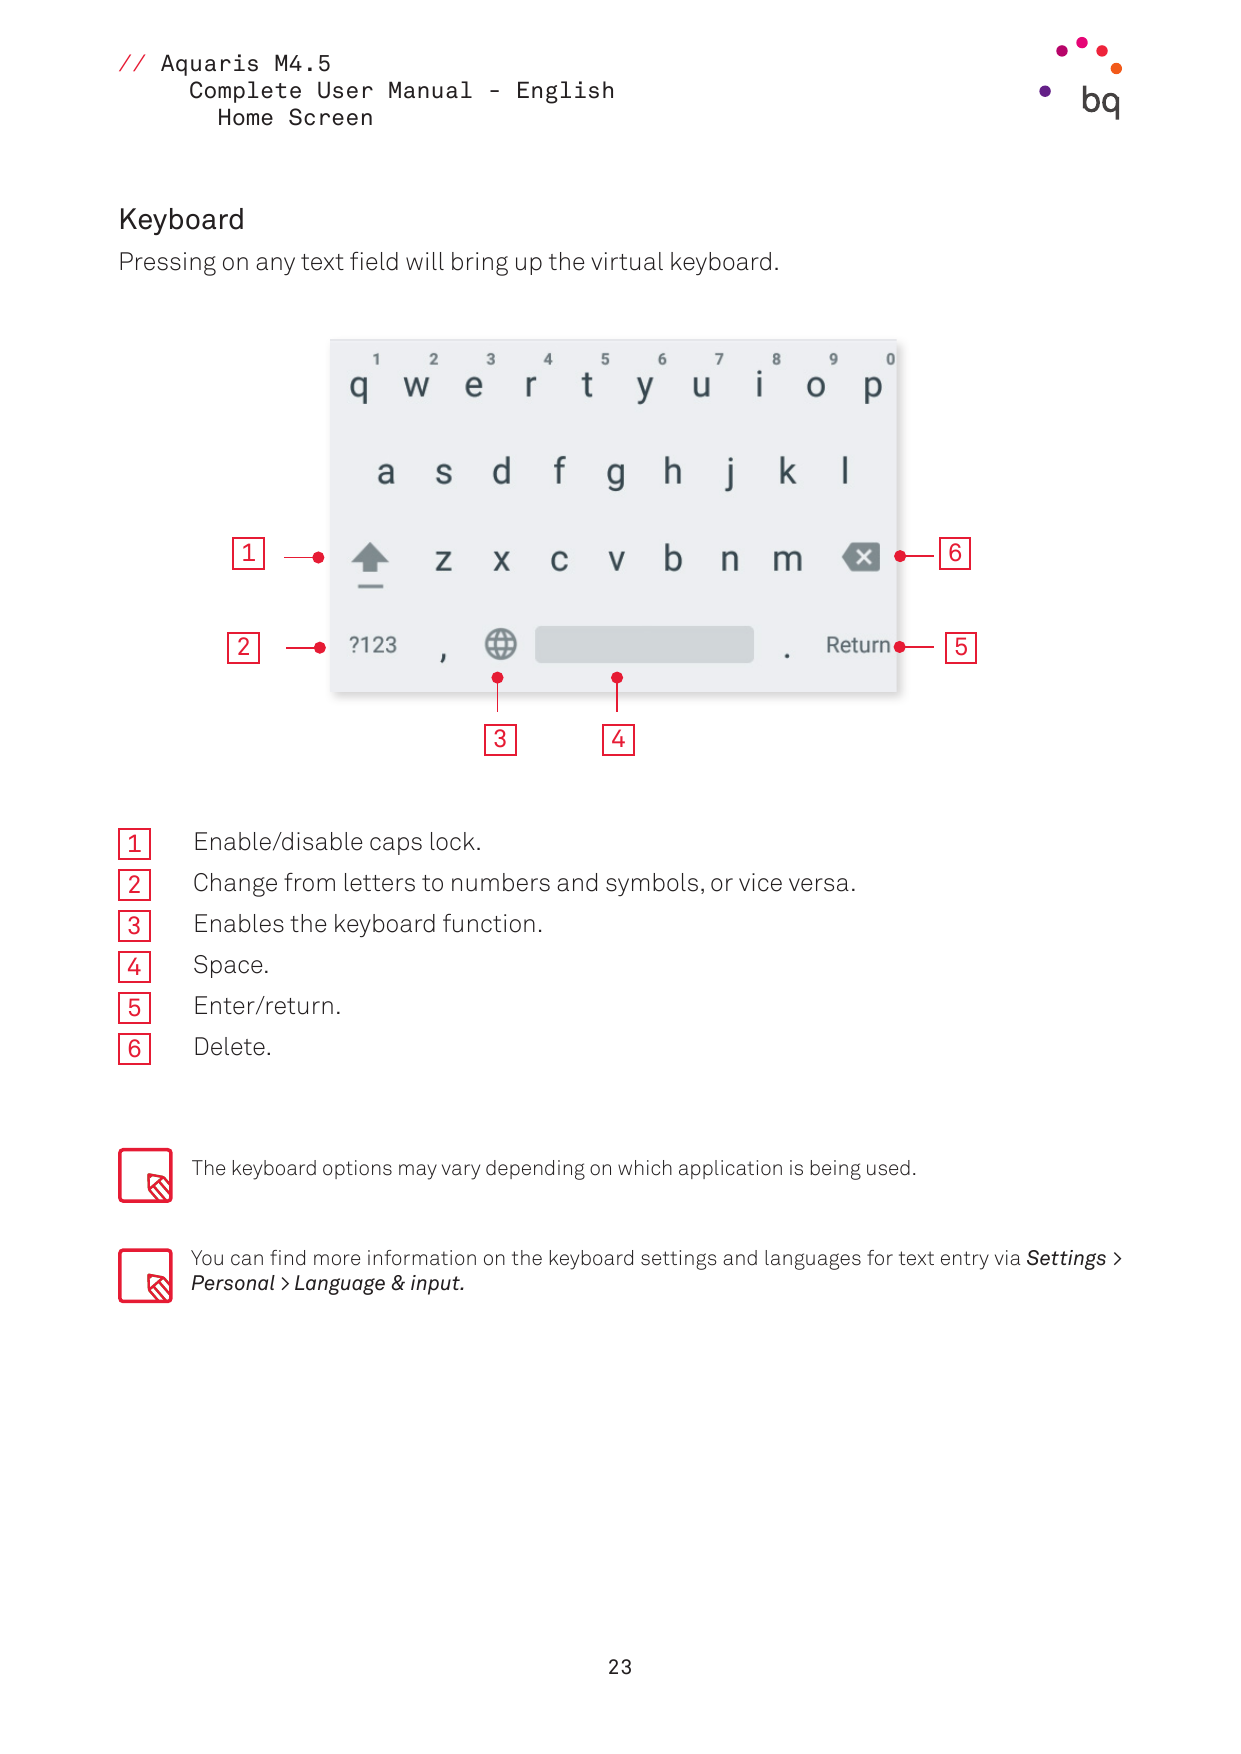 // Aquaris M4.5Complete User Manual - EnglishHome ScreenKeyboardPressing on any text field will bring up the virtual keyboard.16